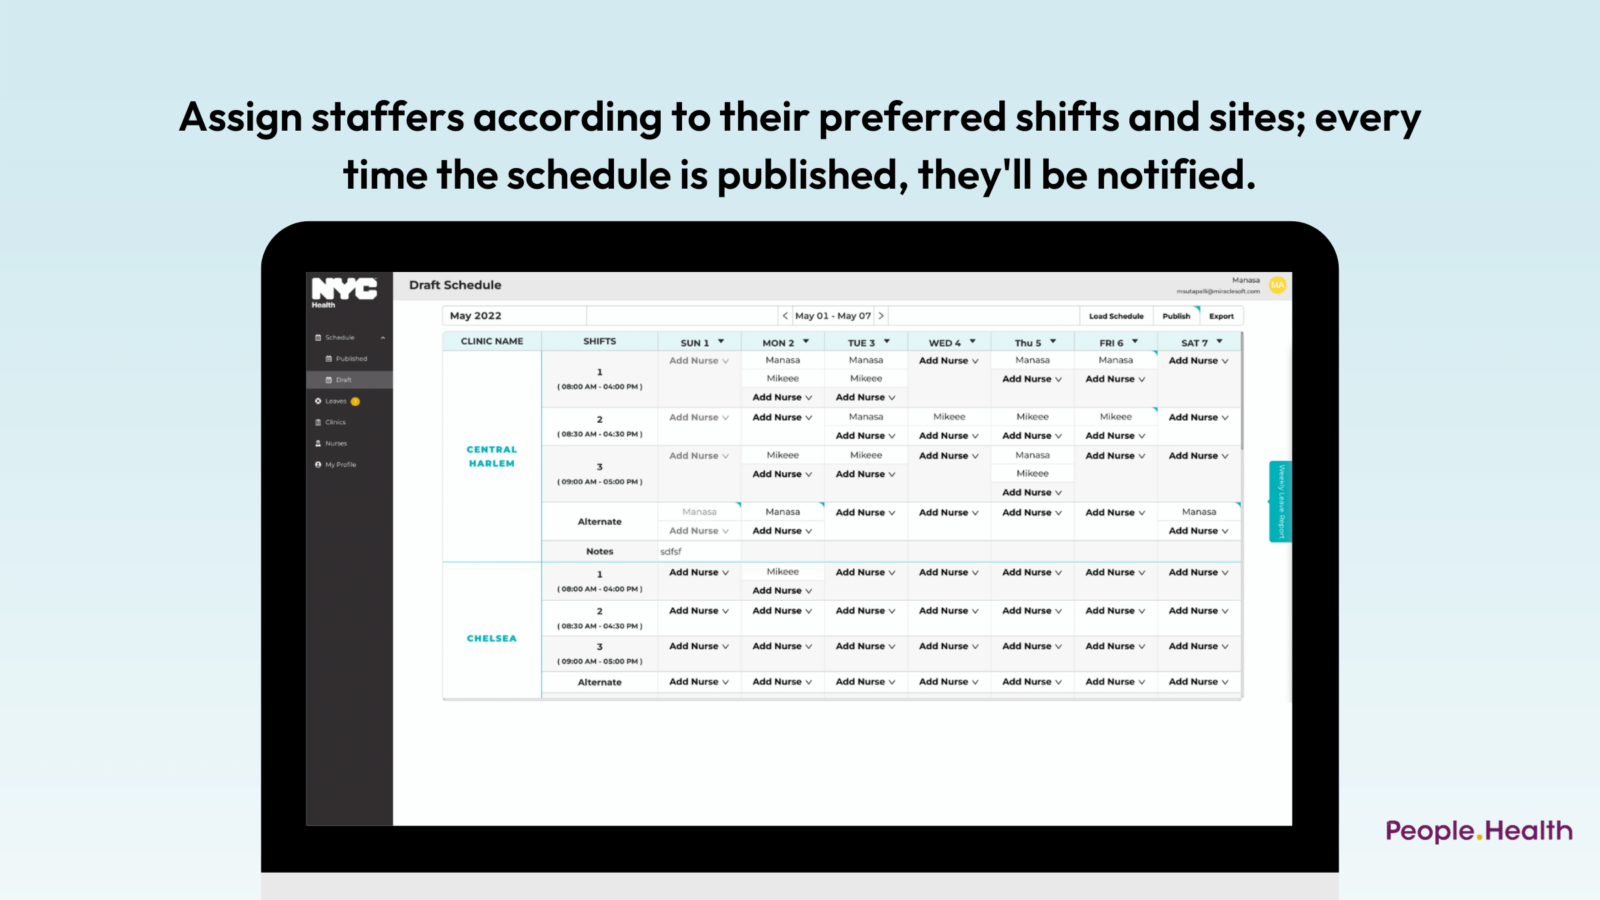 Assign staffers according to their preferred shifts and sites; every time the schedule is published, they'll be notified.